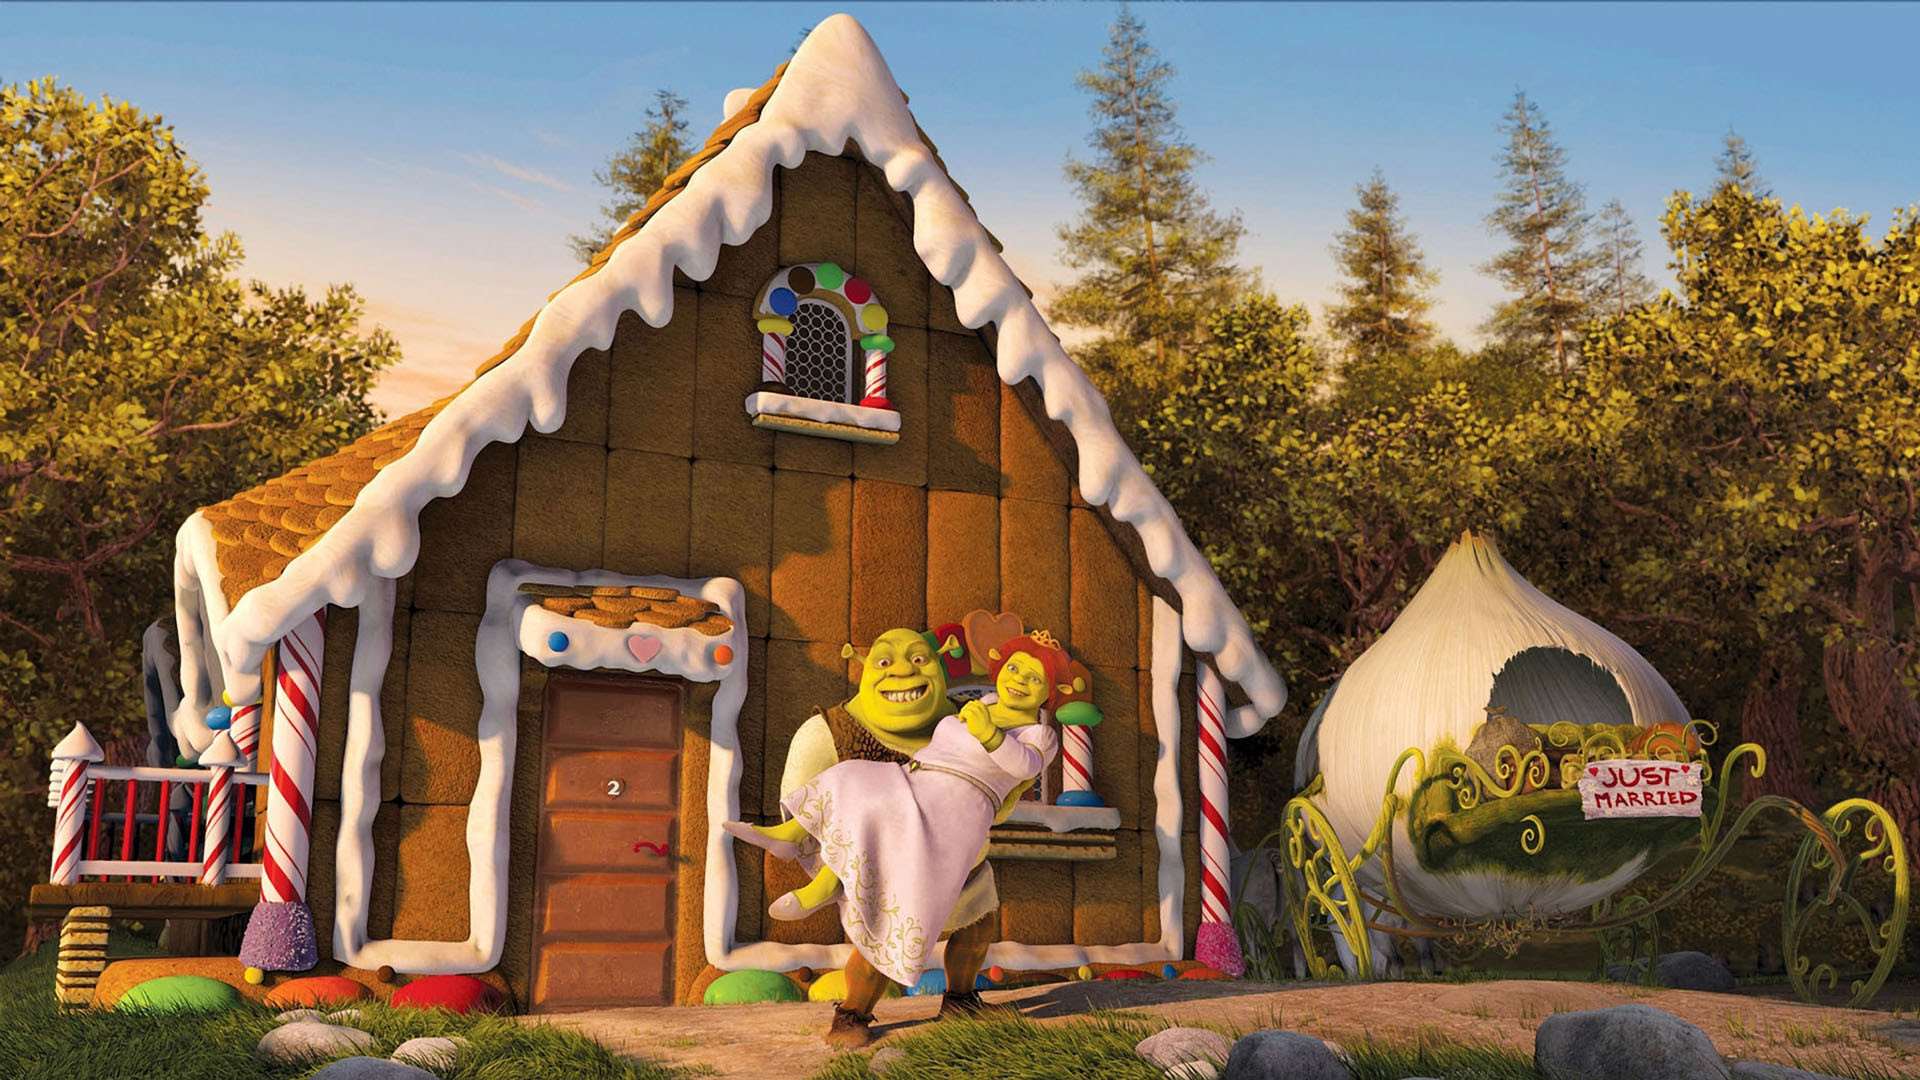 Shrek (voiced by Mike Myers) and Fiona (voiced by Cameron Diaz) get married in Shrek 2 (2004)